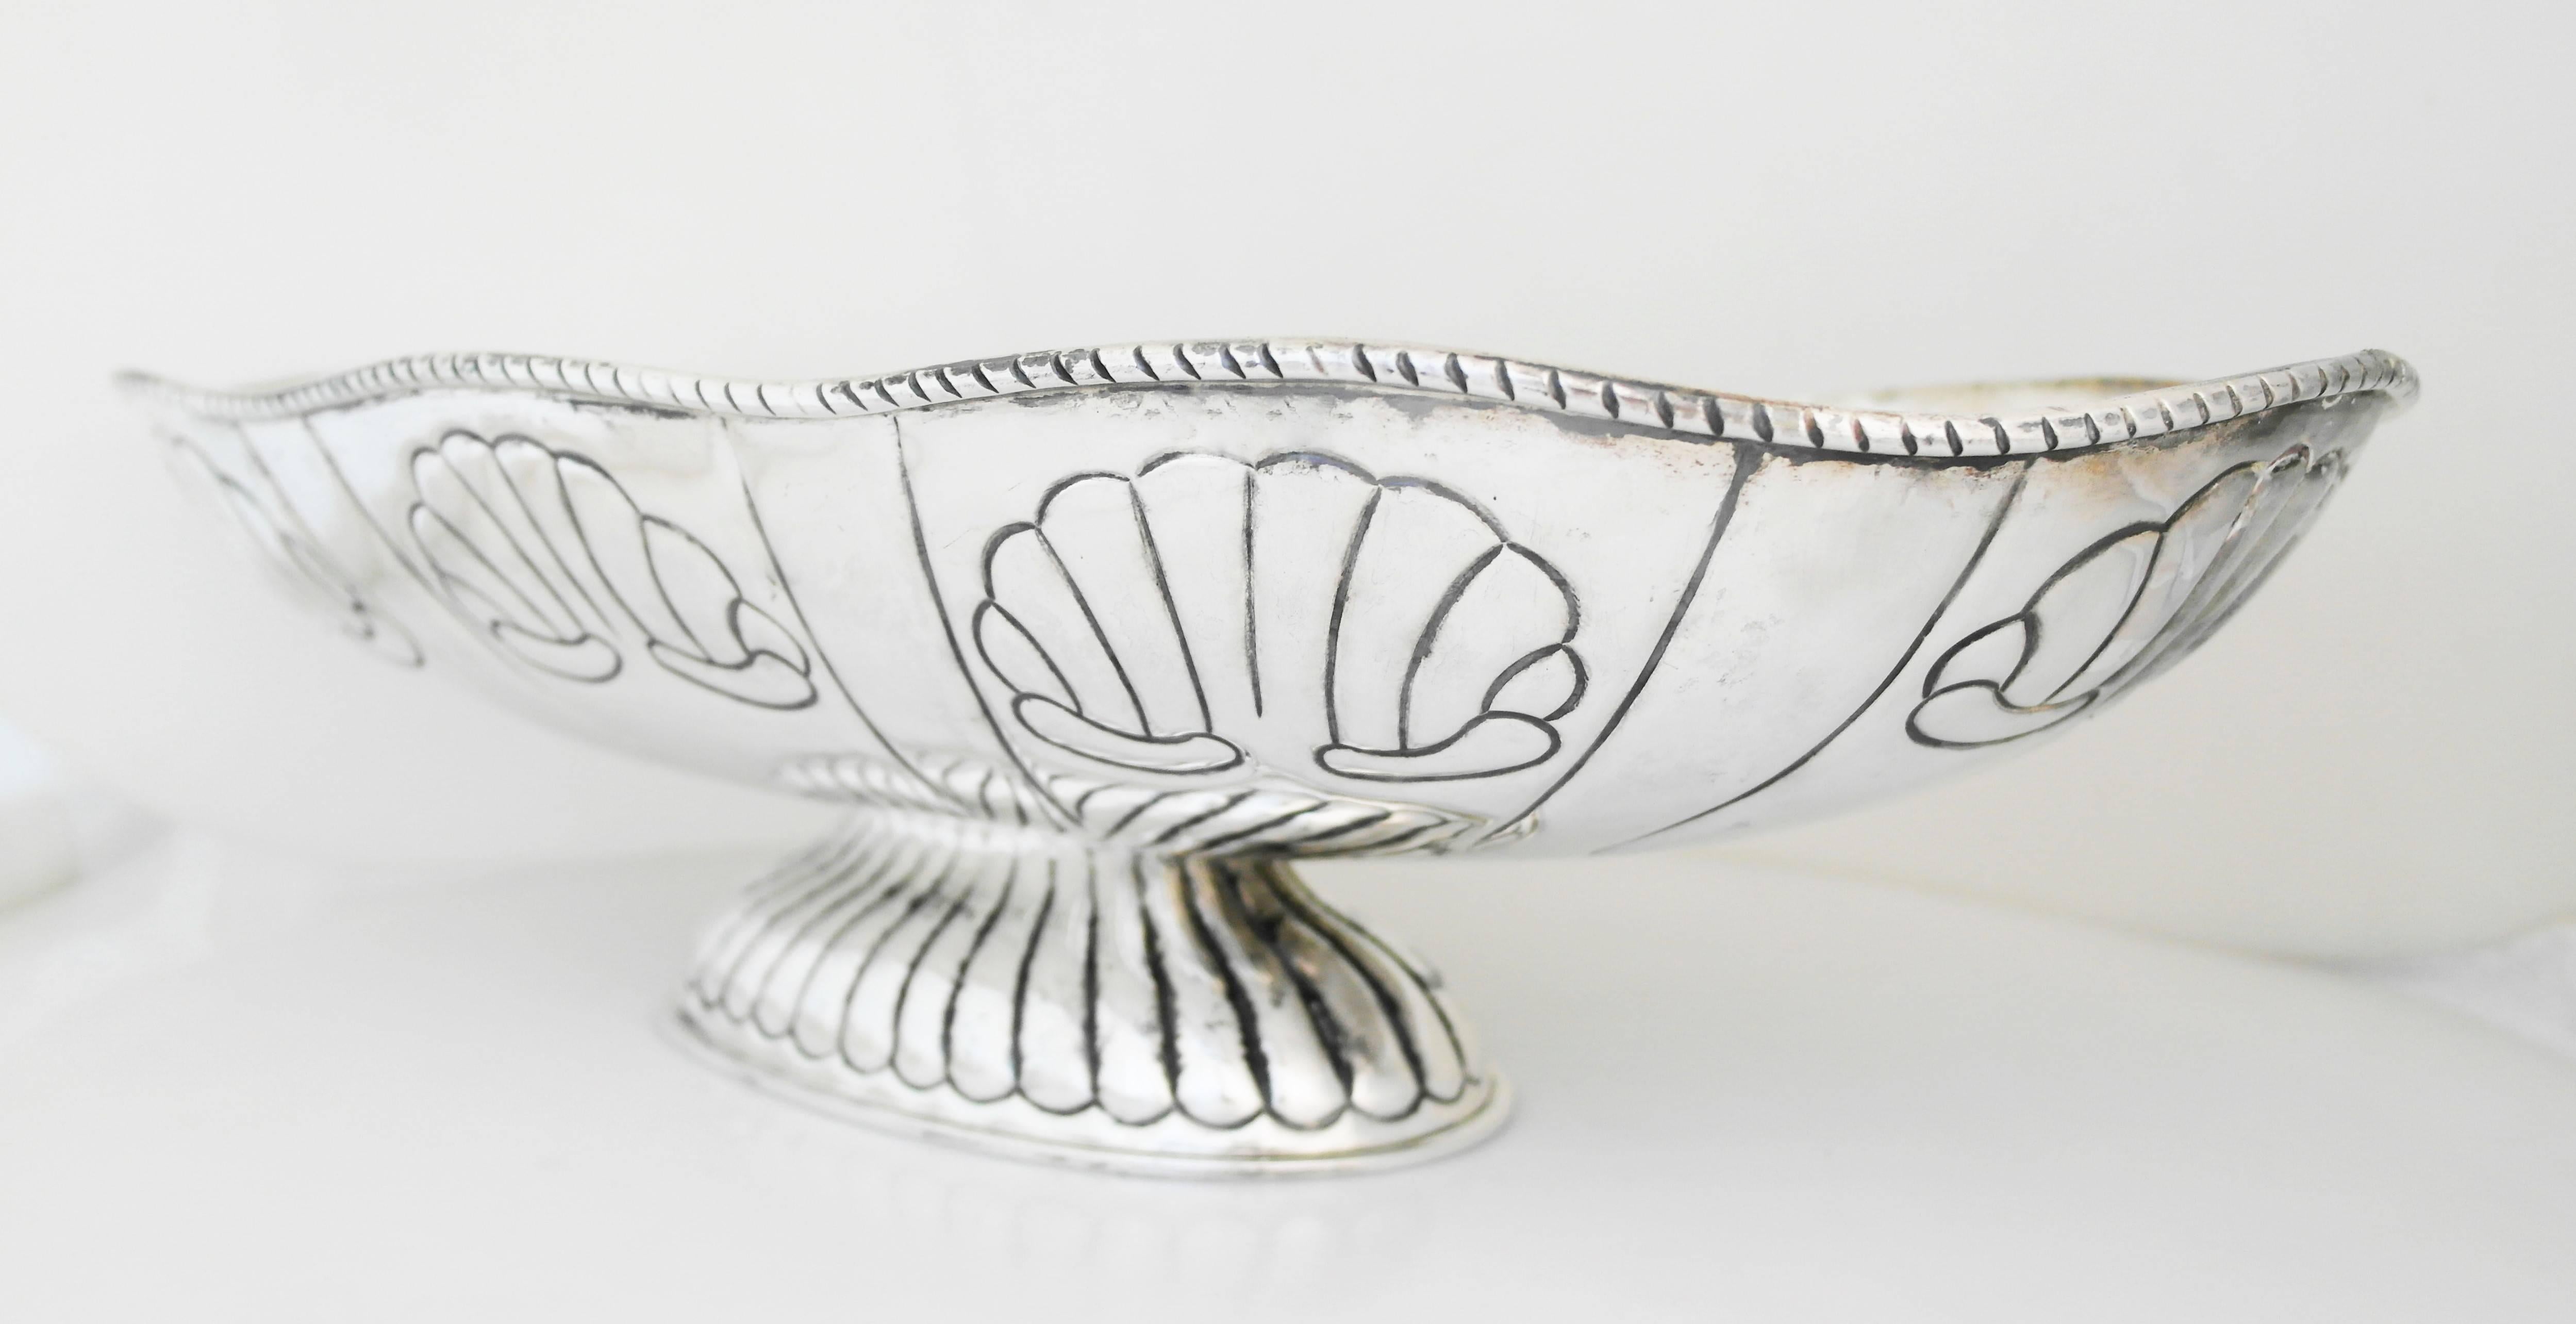 Being offered is a large centerpiece bowl by Tane of Mexico City. Oblong shape, decorated with shell motifs; hand wrought decorated rim; the massive bowl is supported by a reeded pedestal base. Dimensions: 22" x 11" x 6" weight 92 oz.